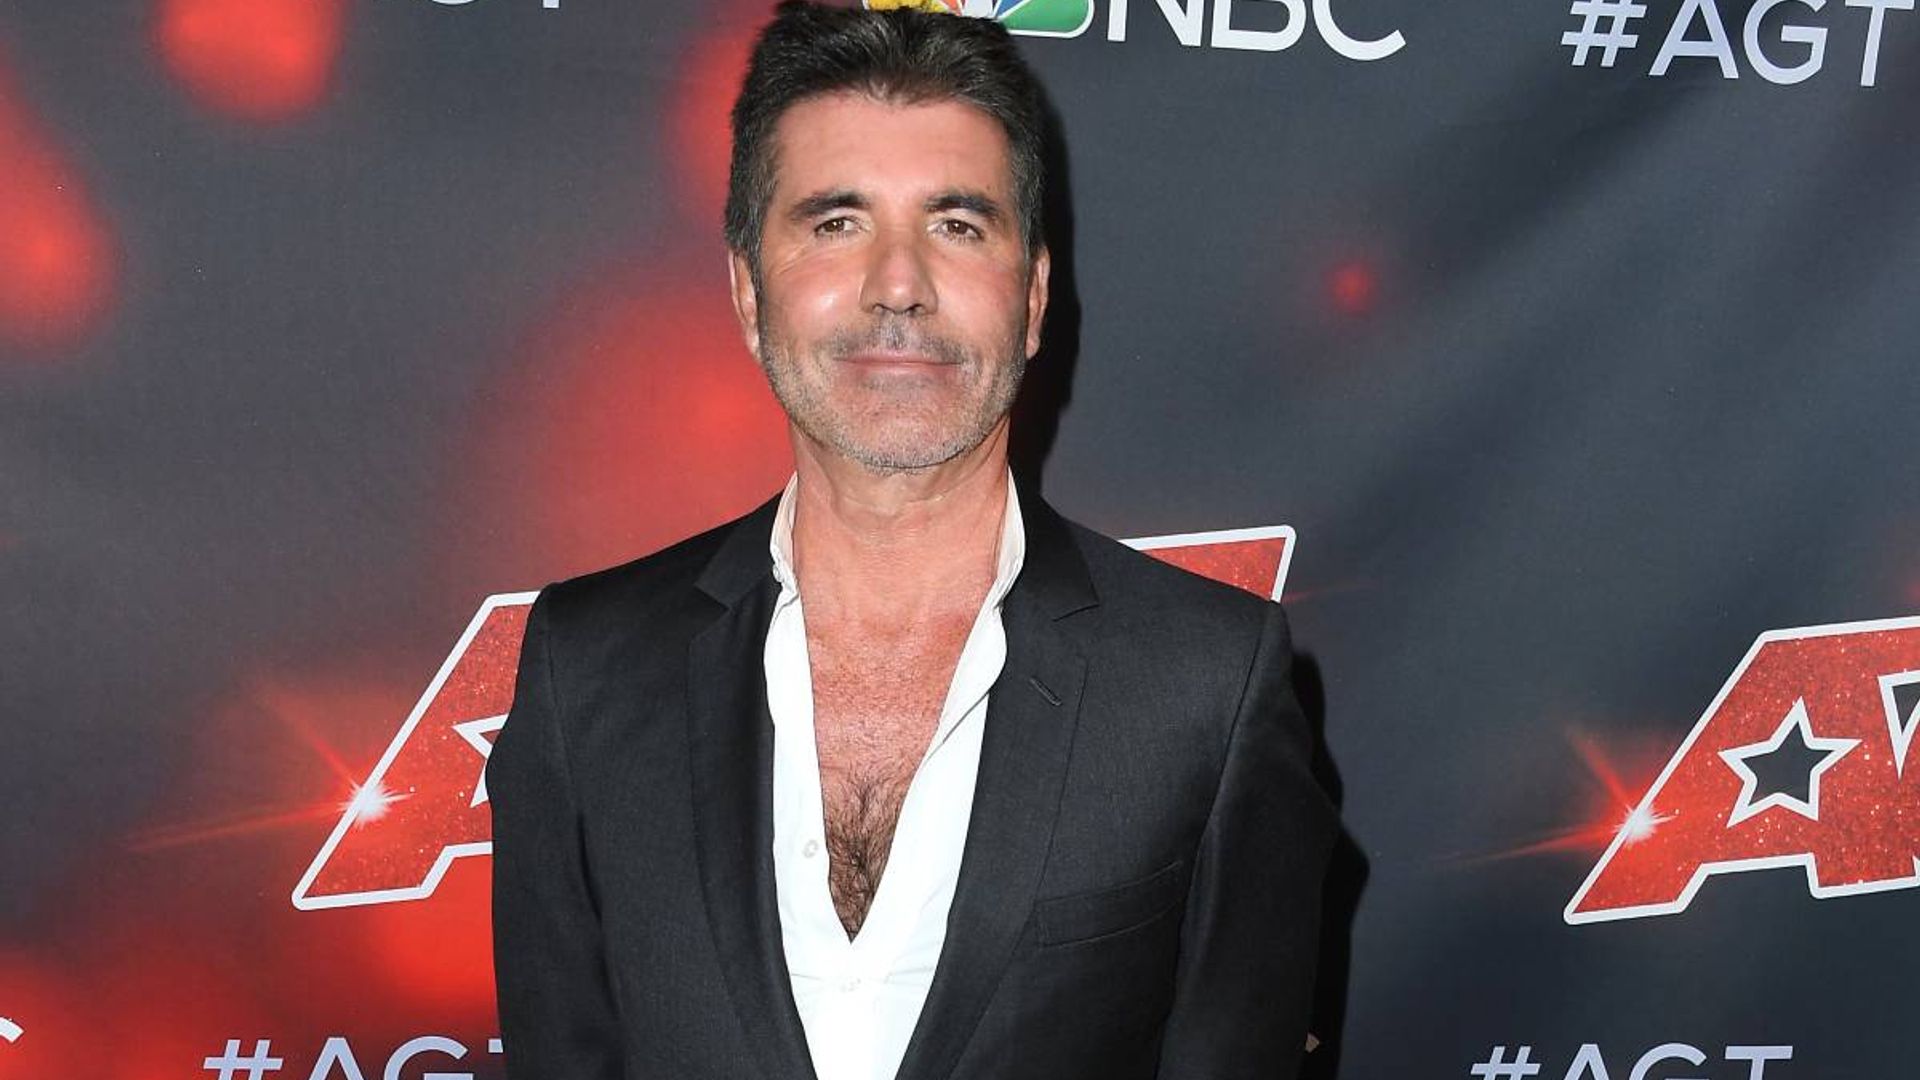 Simon Cowell's heart-breaking last attempt to save Il Divo's Carlos Marin revealed